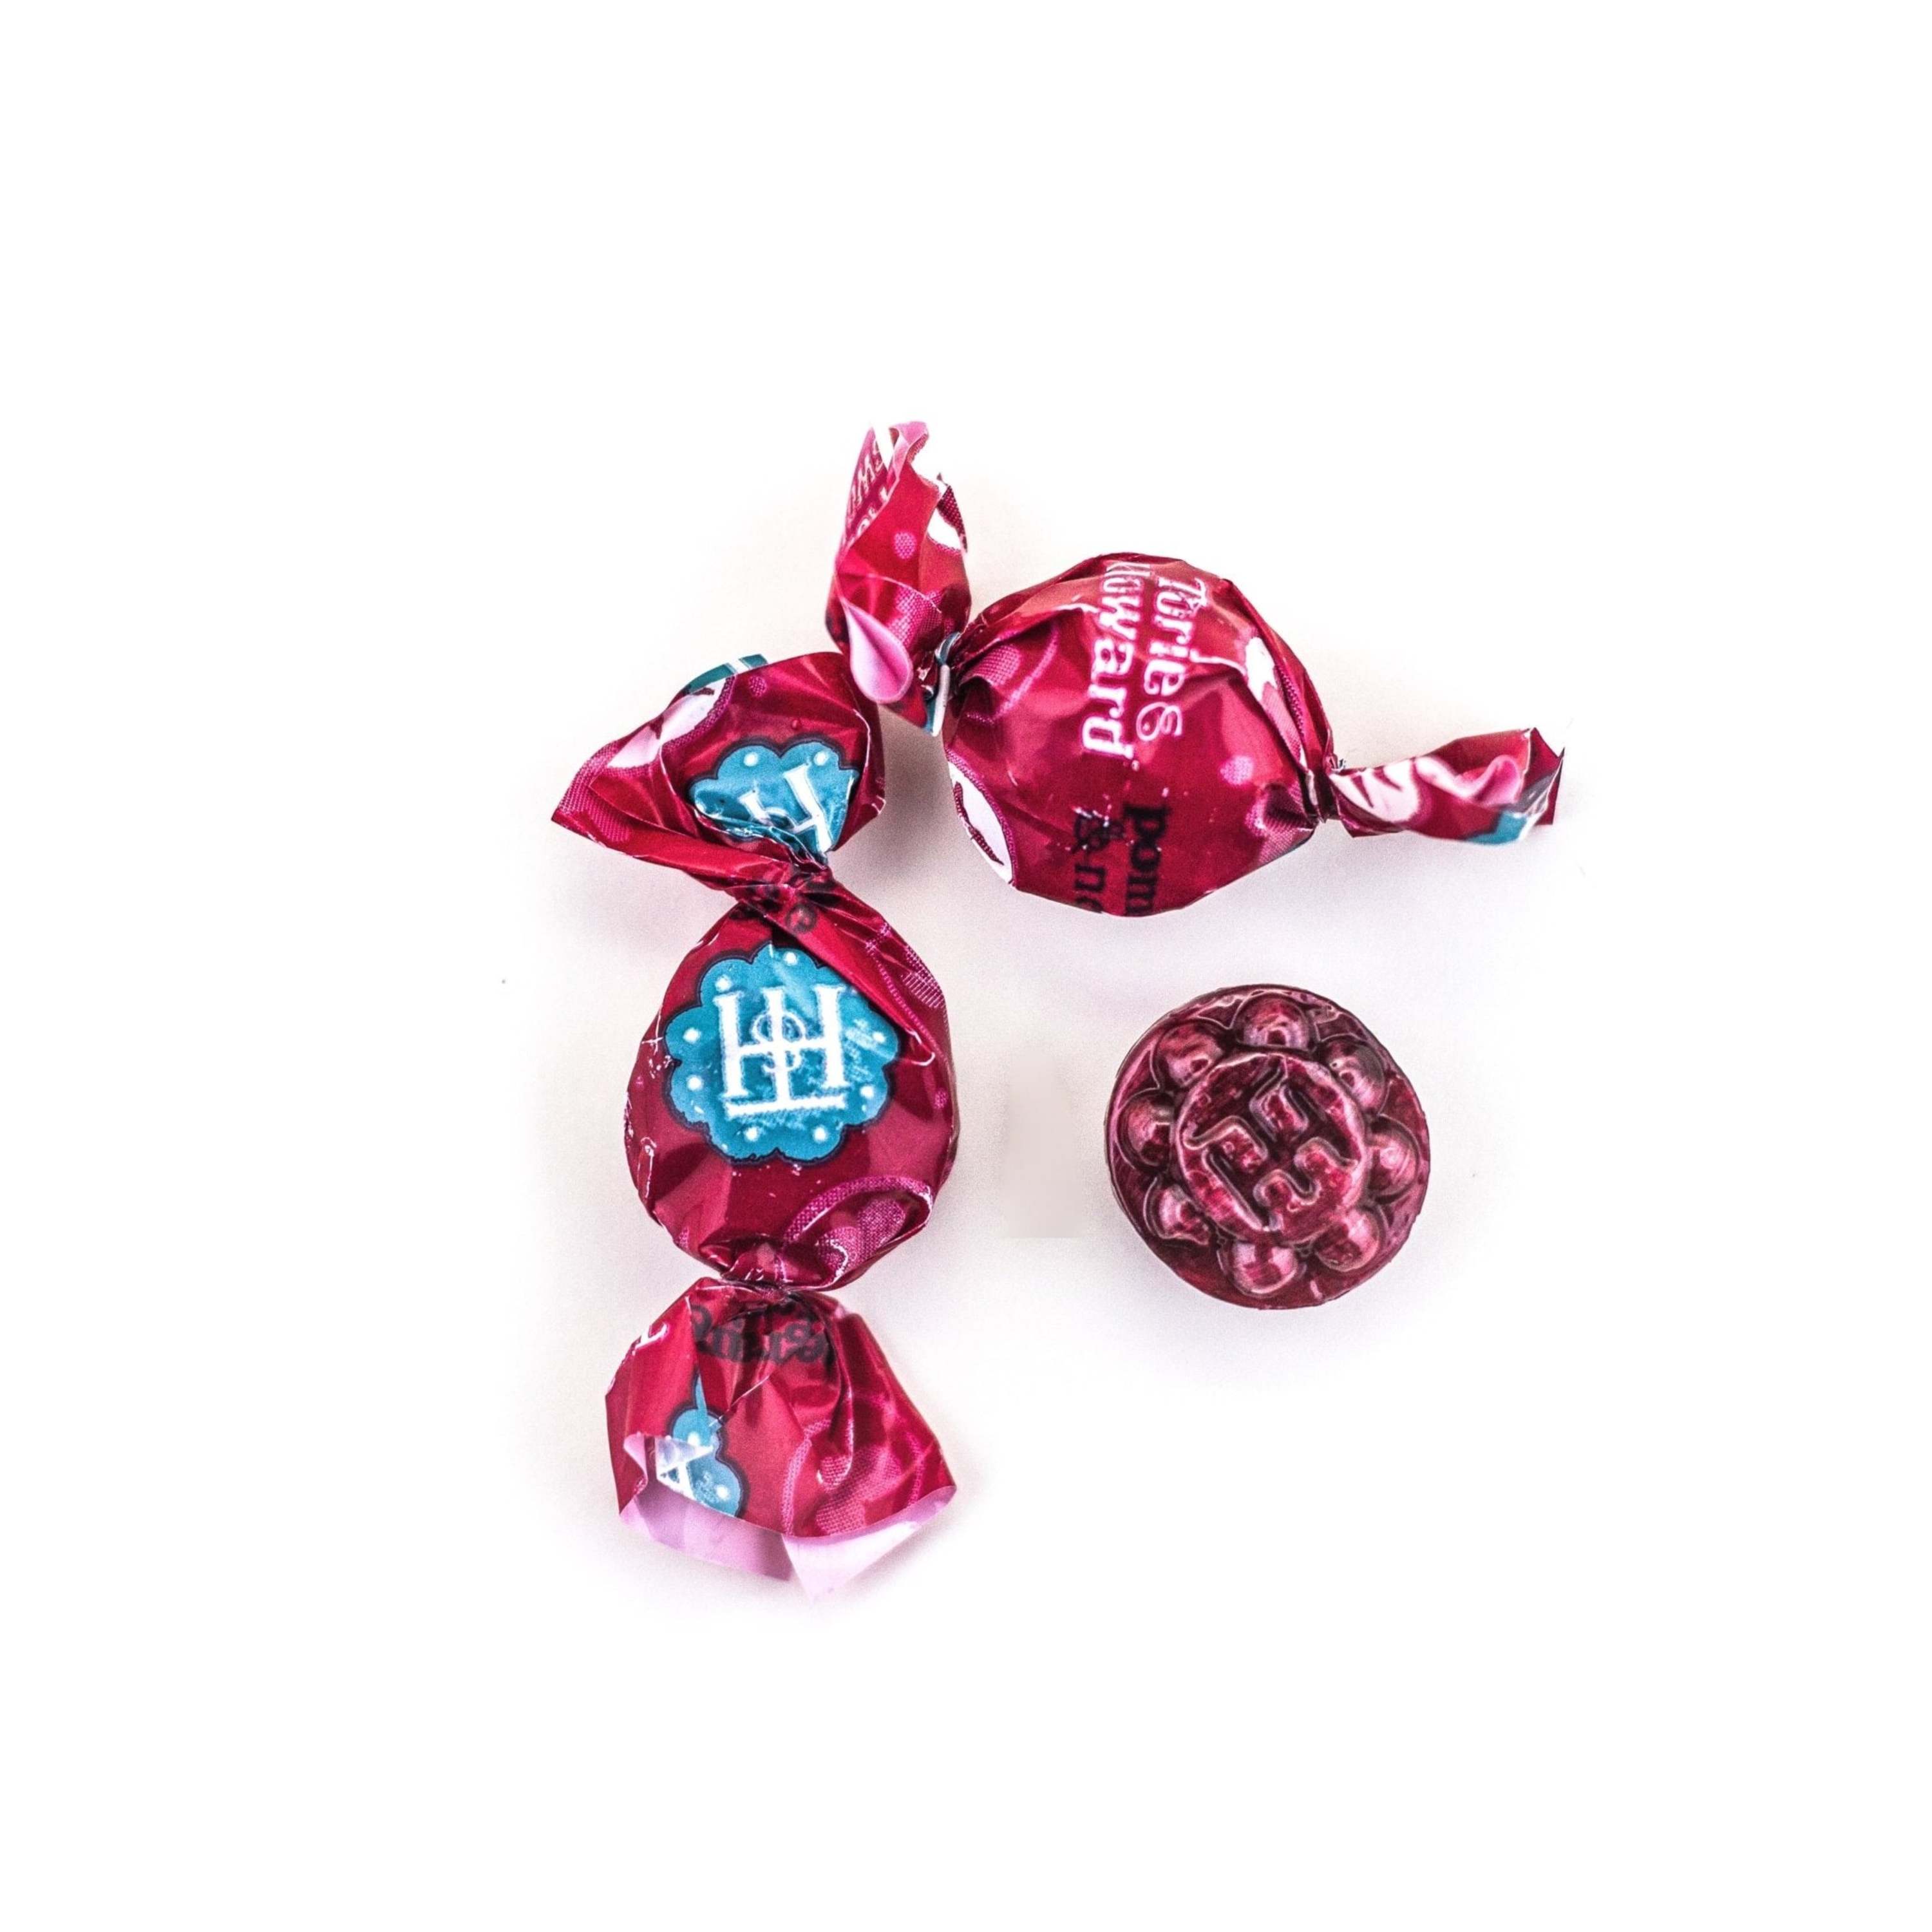 Wrapped and unwrapped Pomegranate & Nectarine Organic Hard Candy pieces